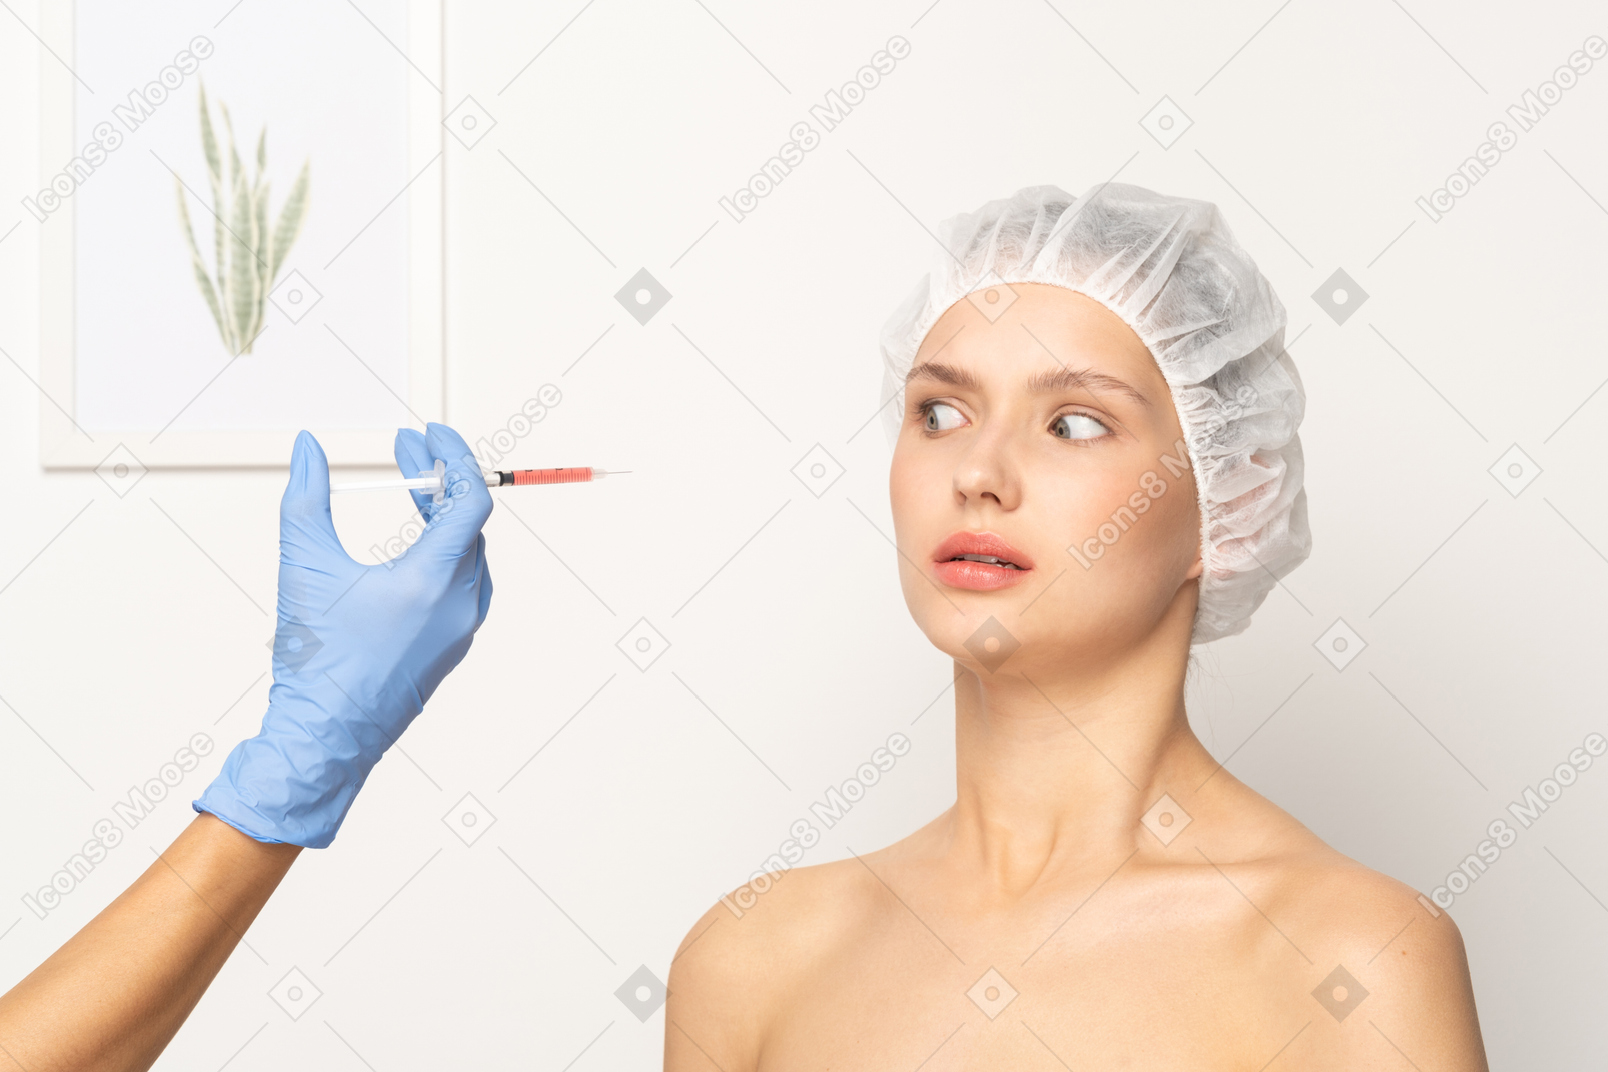 Woman looking terrified of getting face injection